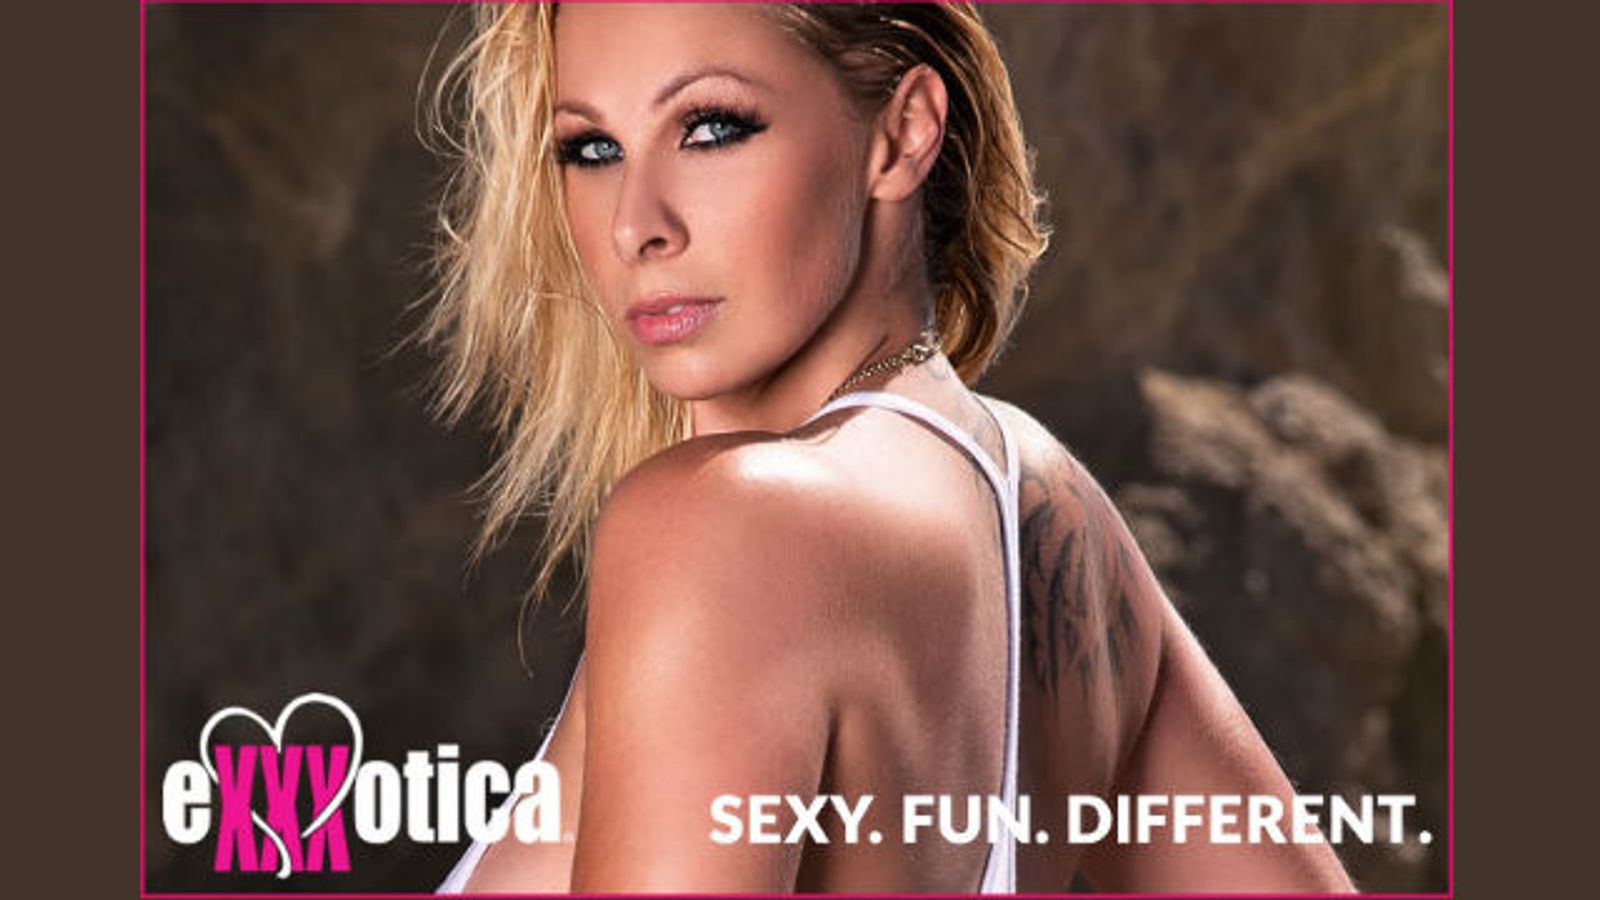 Exxxotica Chicago Launches Website and Ticket Sales